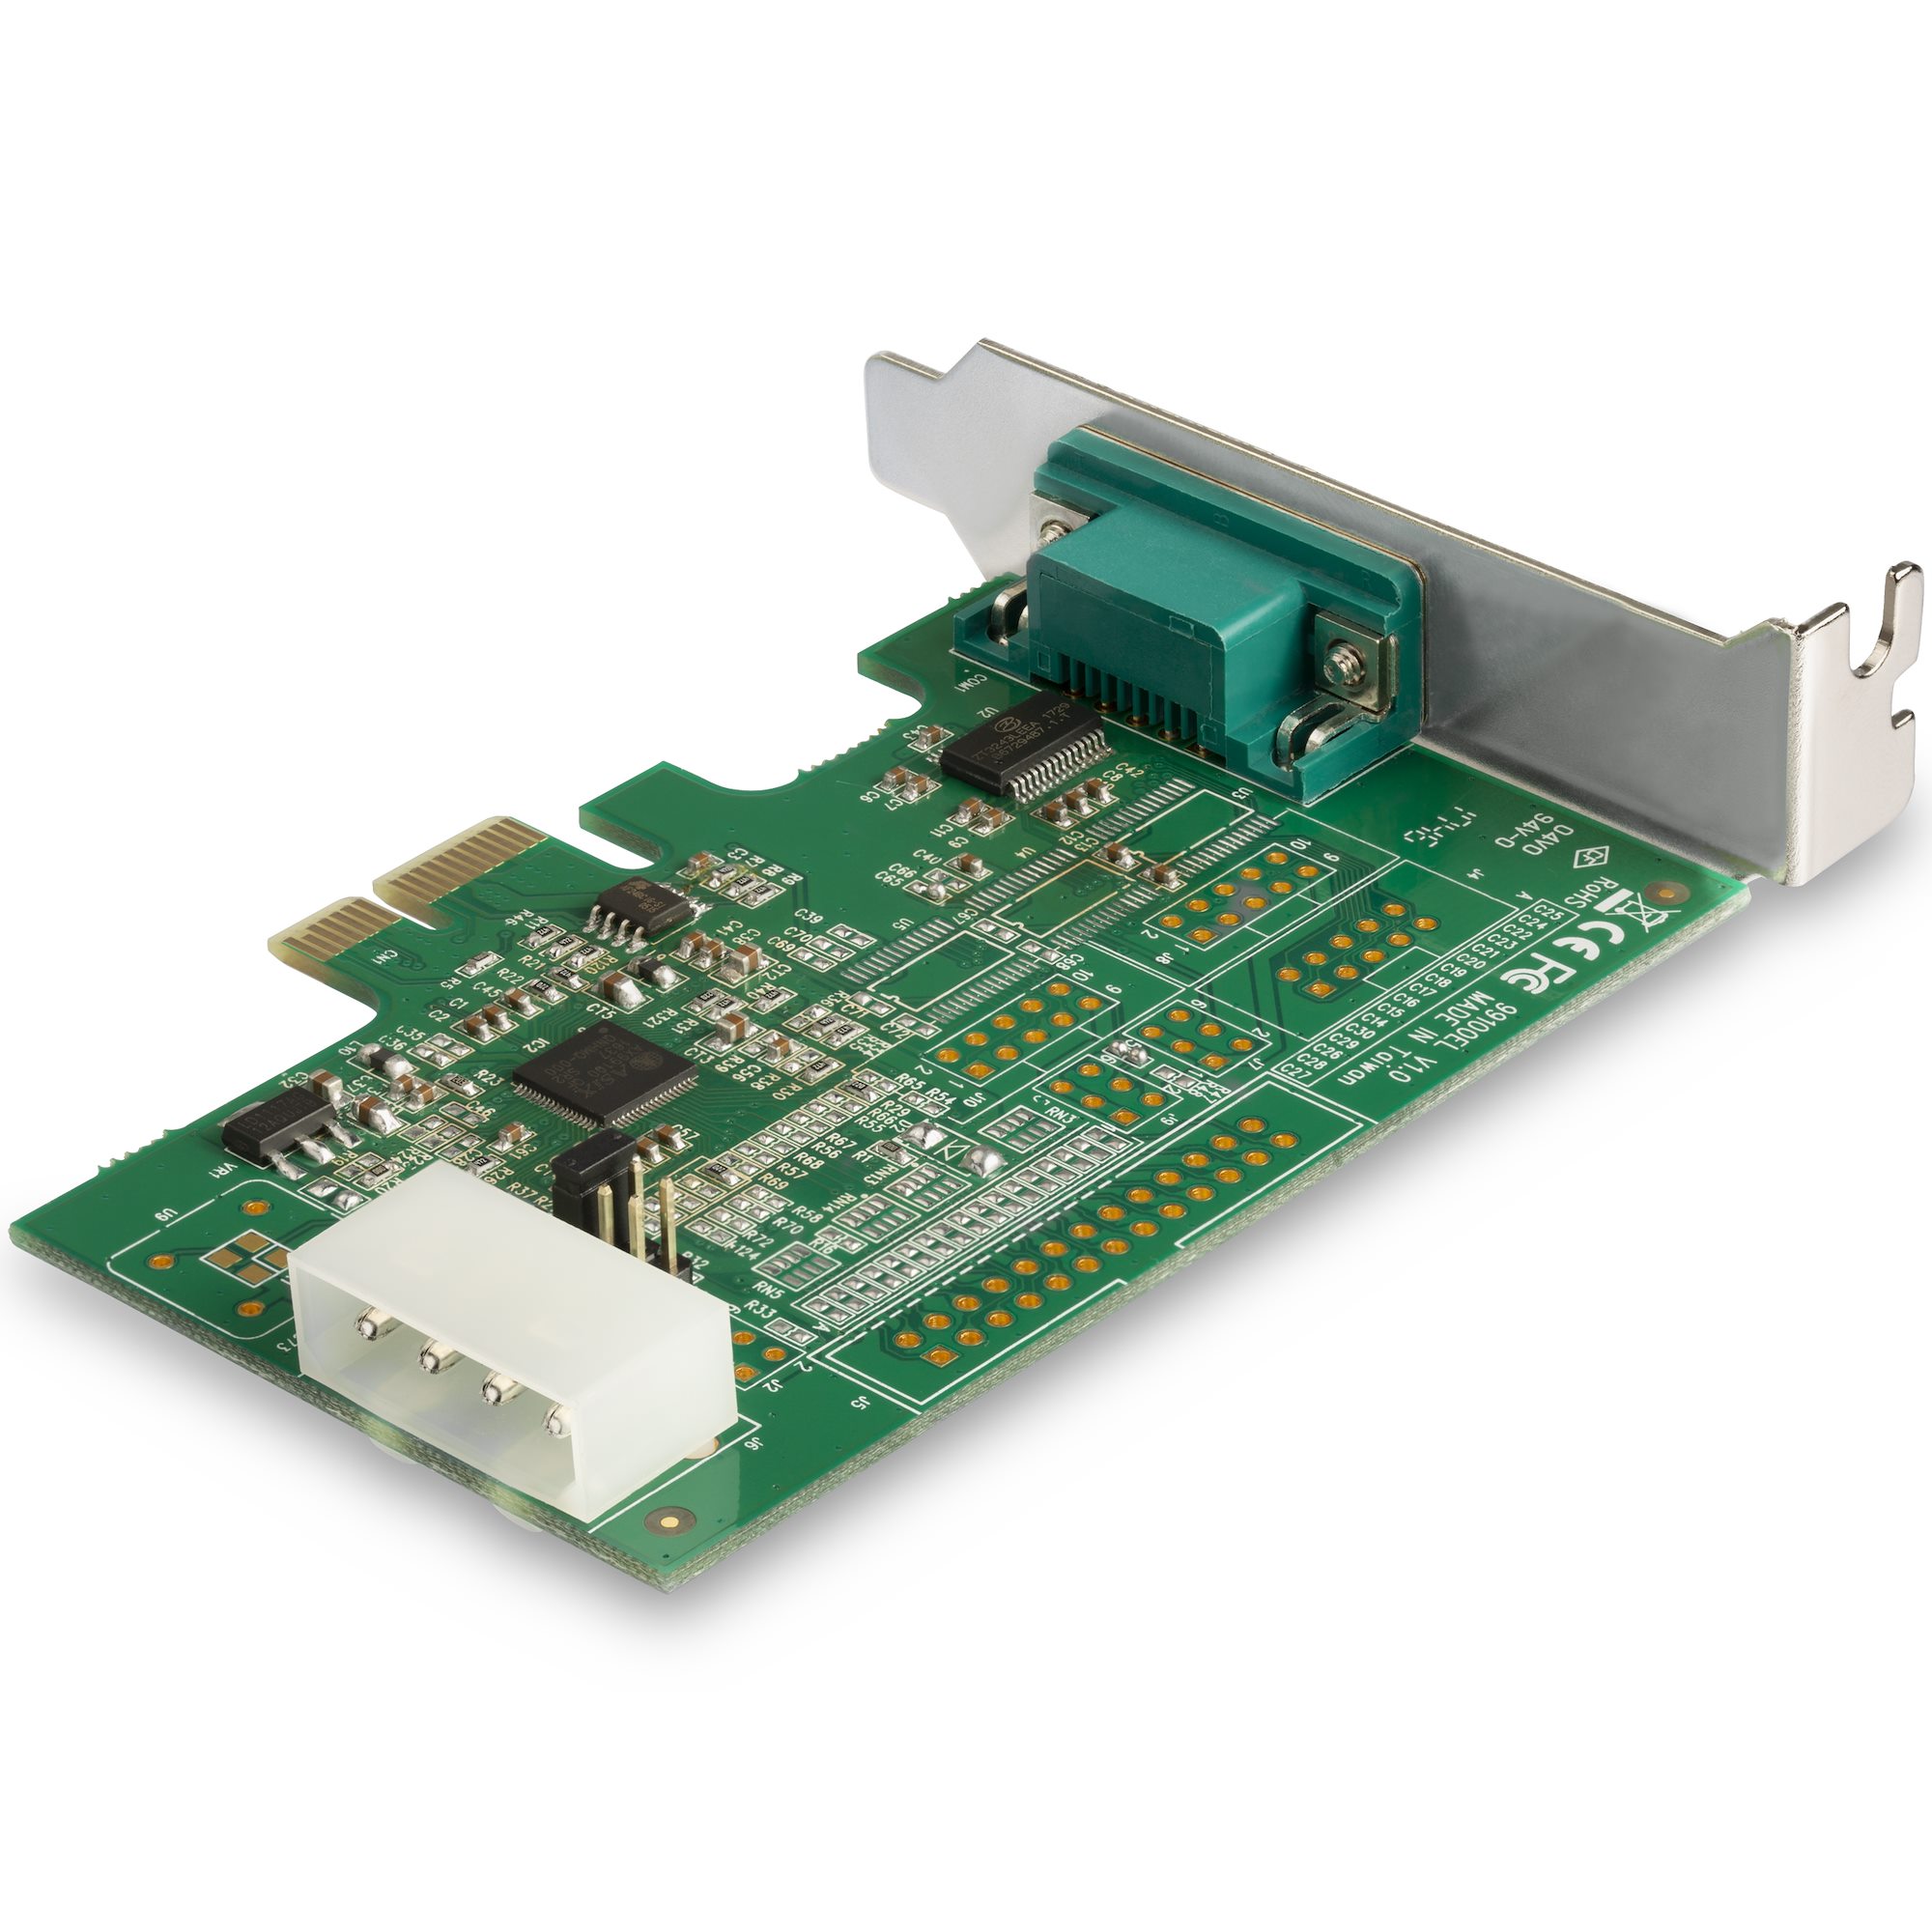 RS232 Expansion Card PCI-E to AX99100 Computer Accessory 115200bps for SPP/Byte/ECP Mode 125 4 Port PCI Express RS232 Serial Adapter Card 